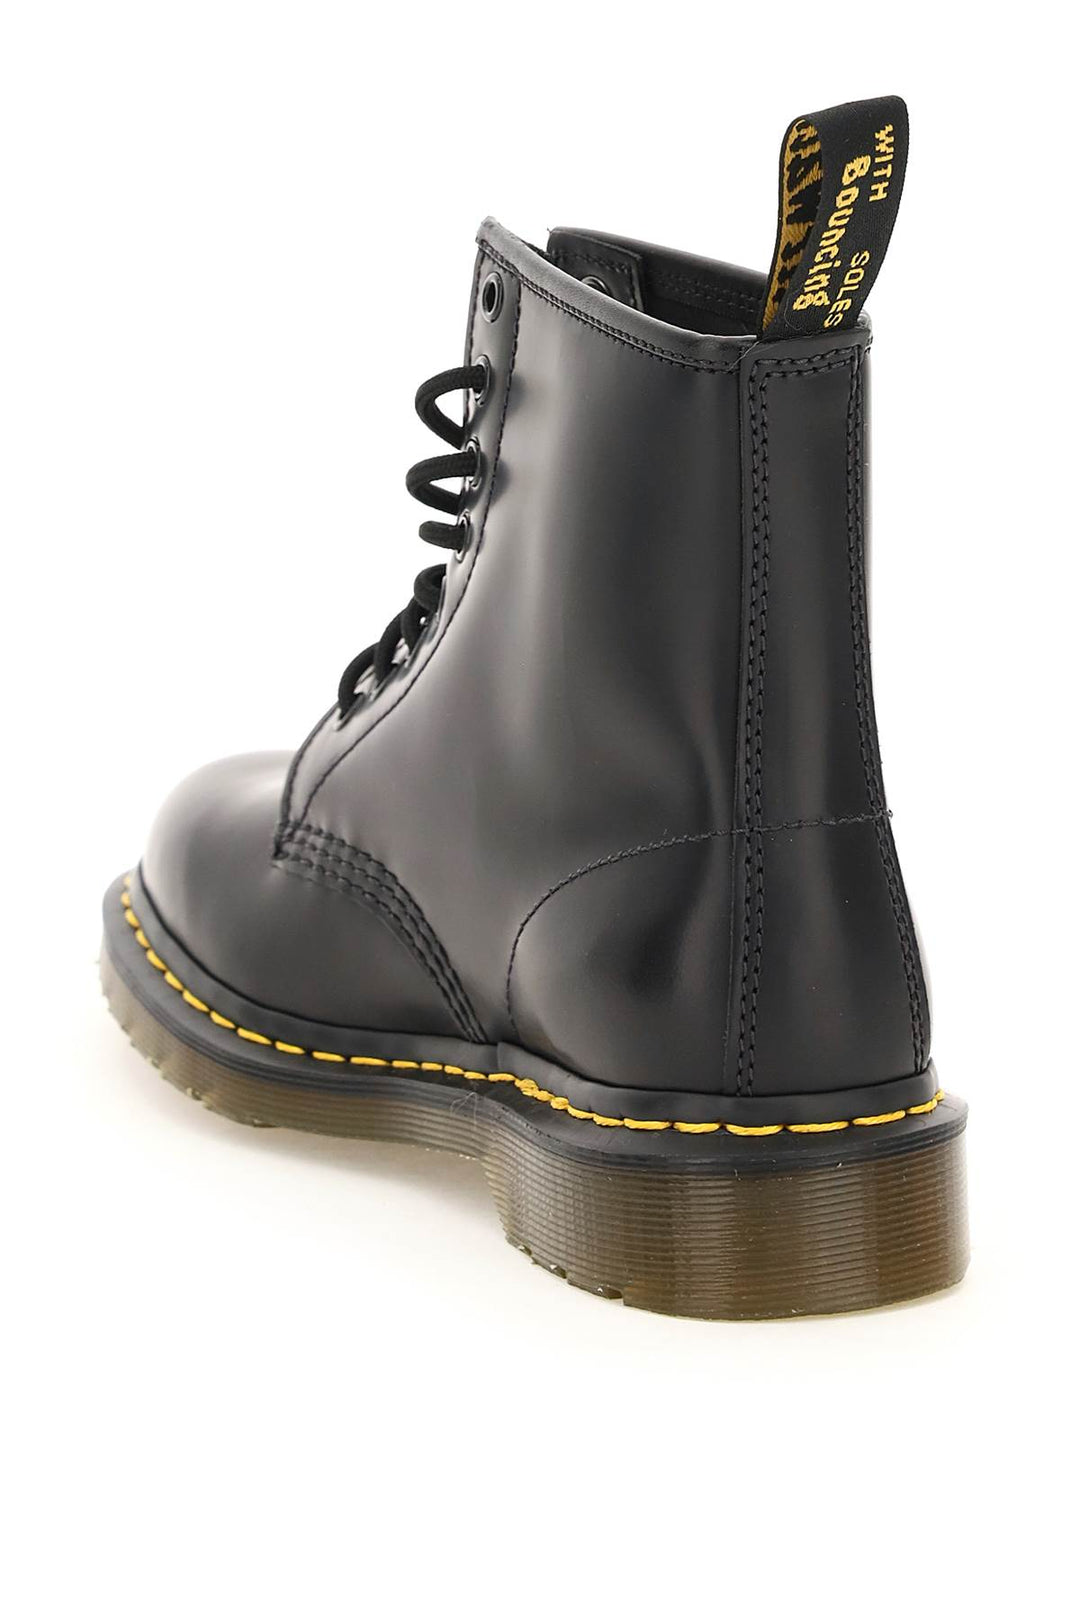 Dr.Martens 1460 Smooth Lace Up Combat Boots   Black